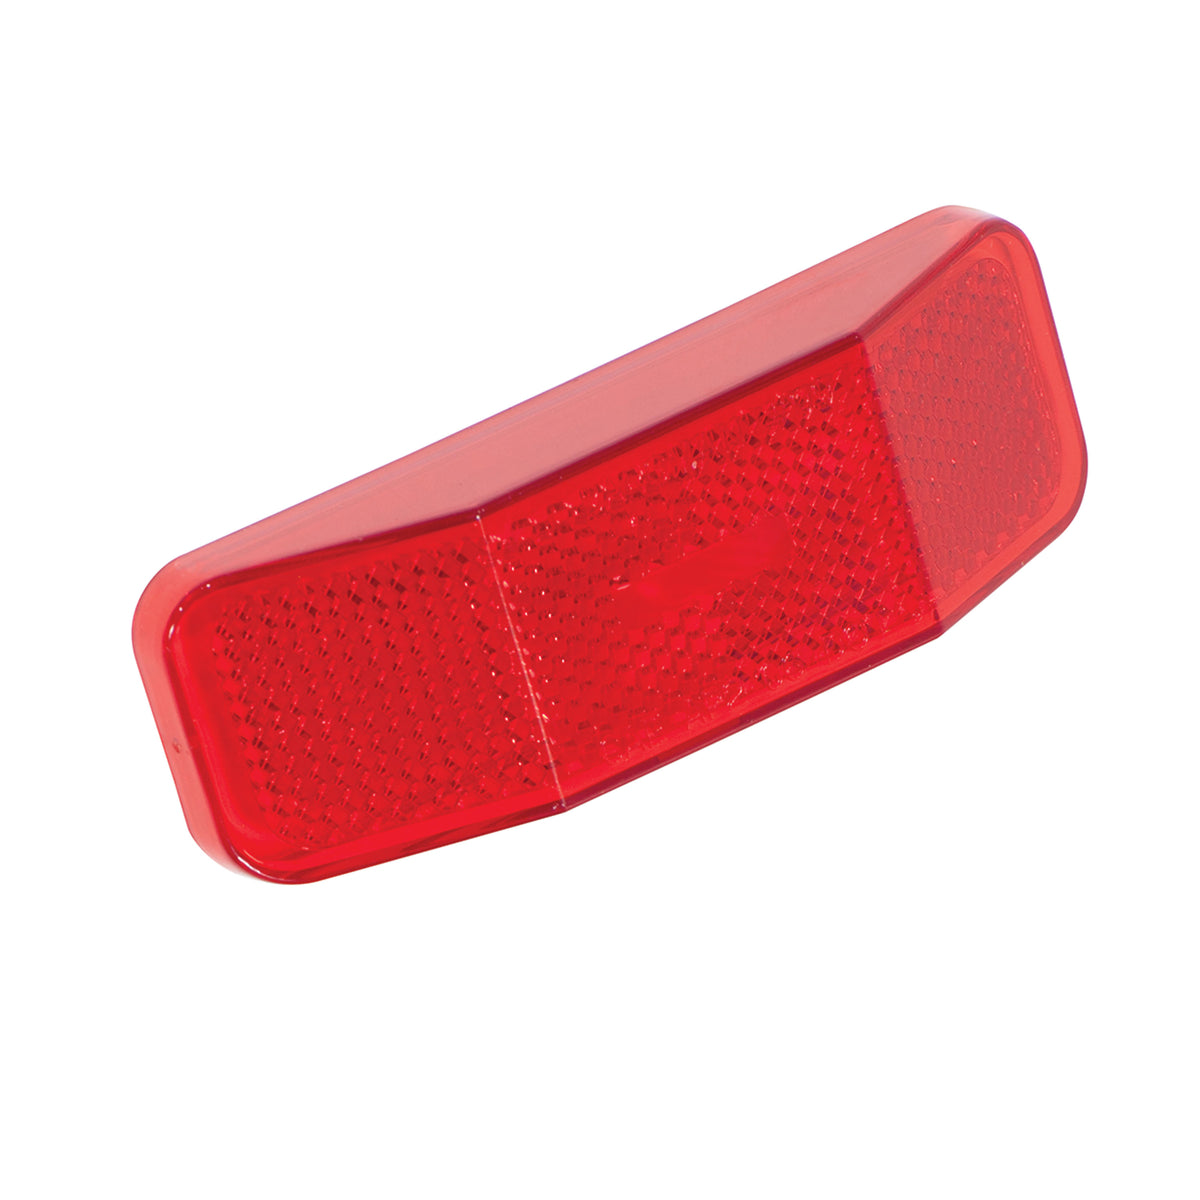 Bargman 31-99-001 Clearance Light #99 - Red